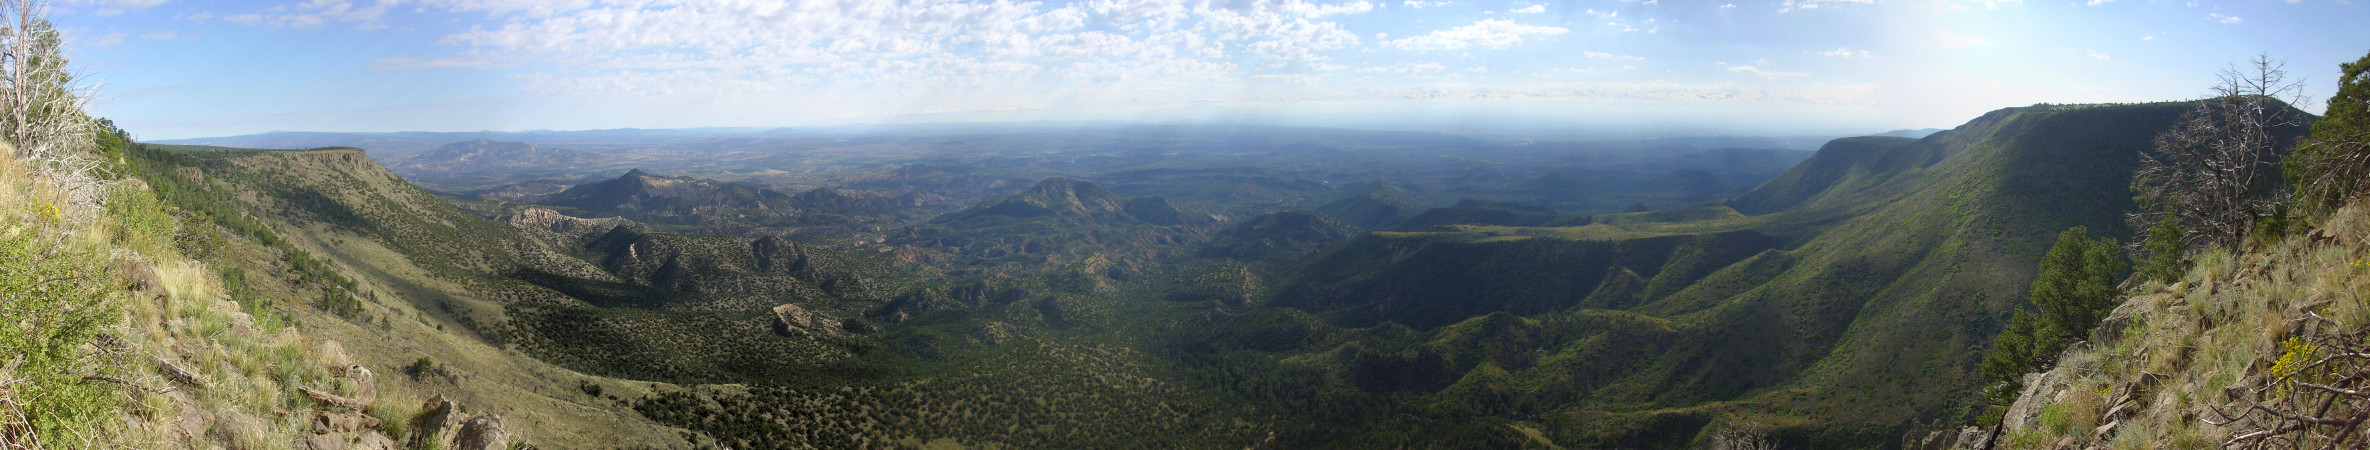 Looking east from Lobato Mesa